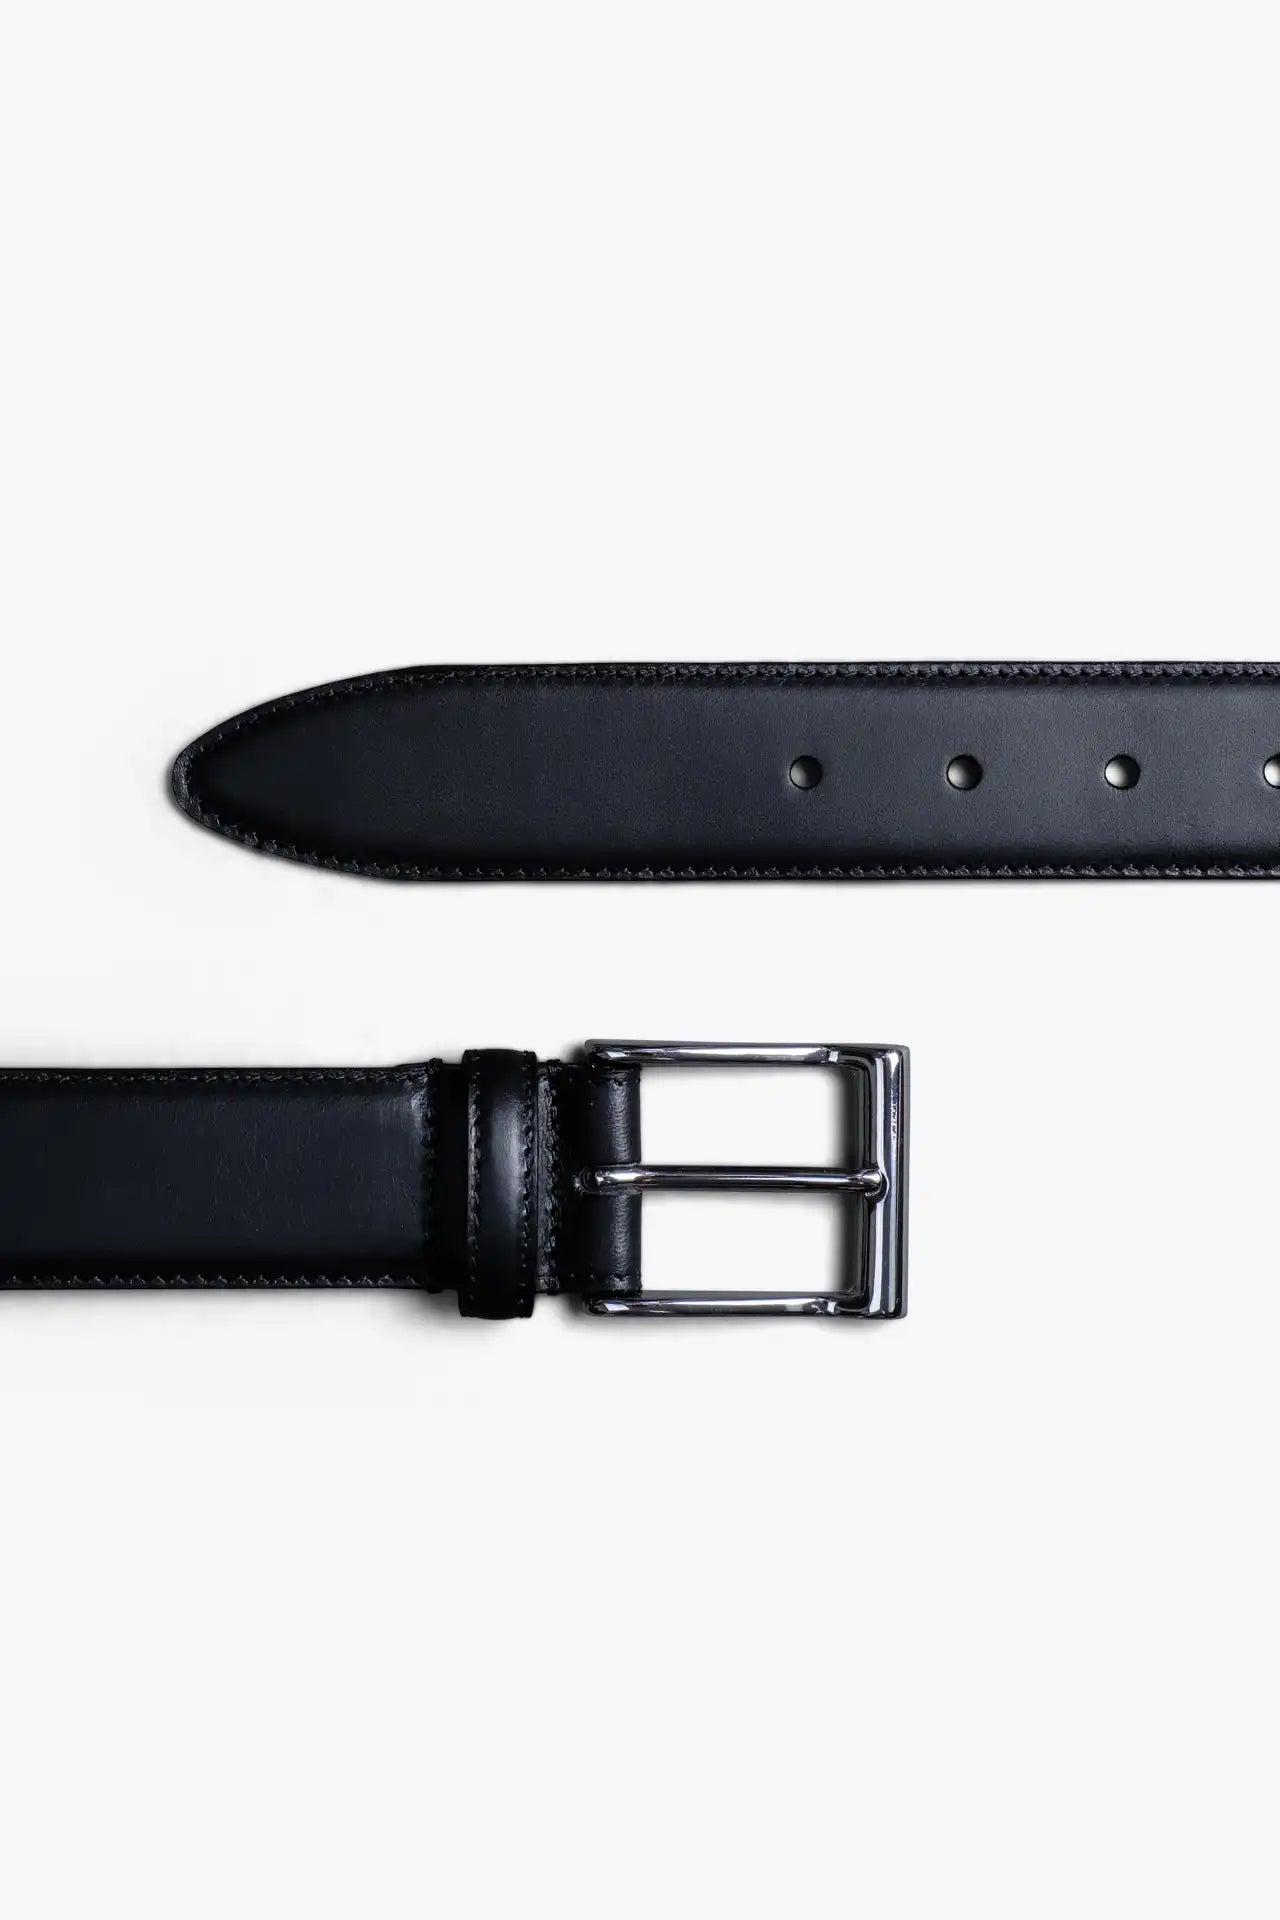 Black Leather Belt in minimalist design, Made in Italy from vegetable tanned leather. Perfect to match with hand made dress shoes. 